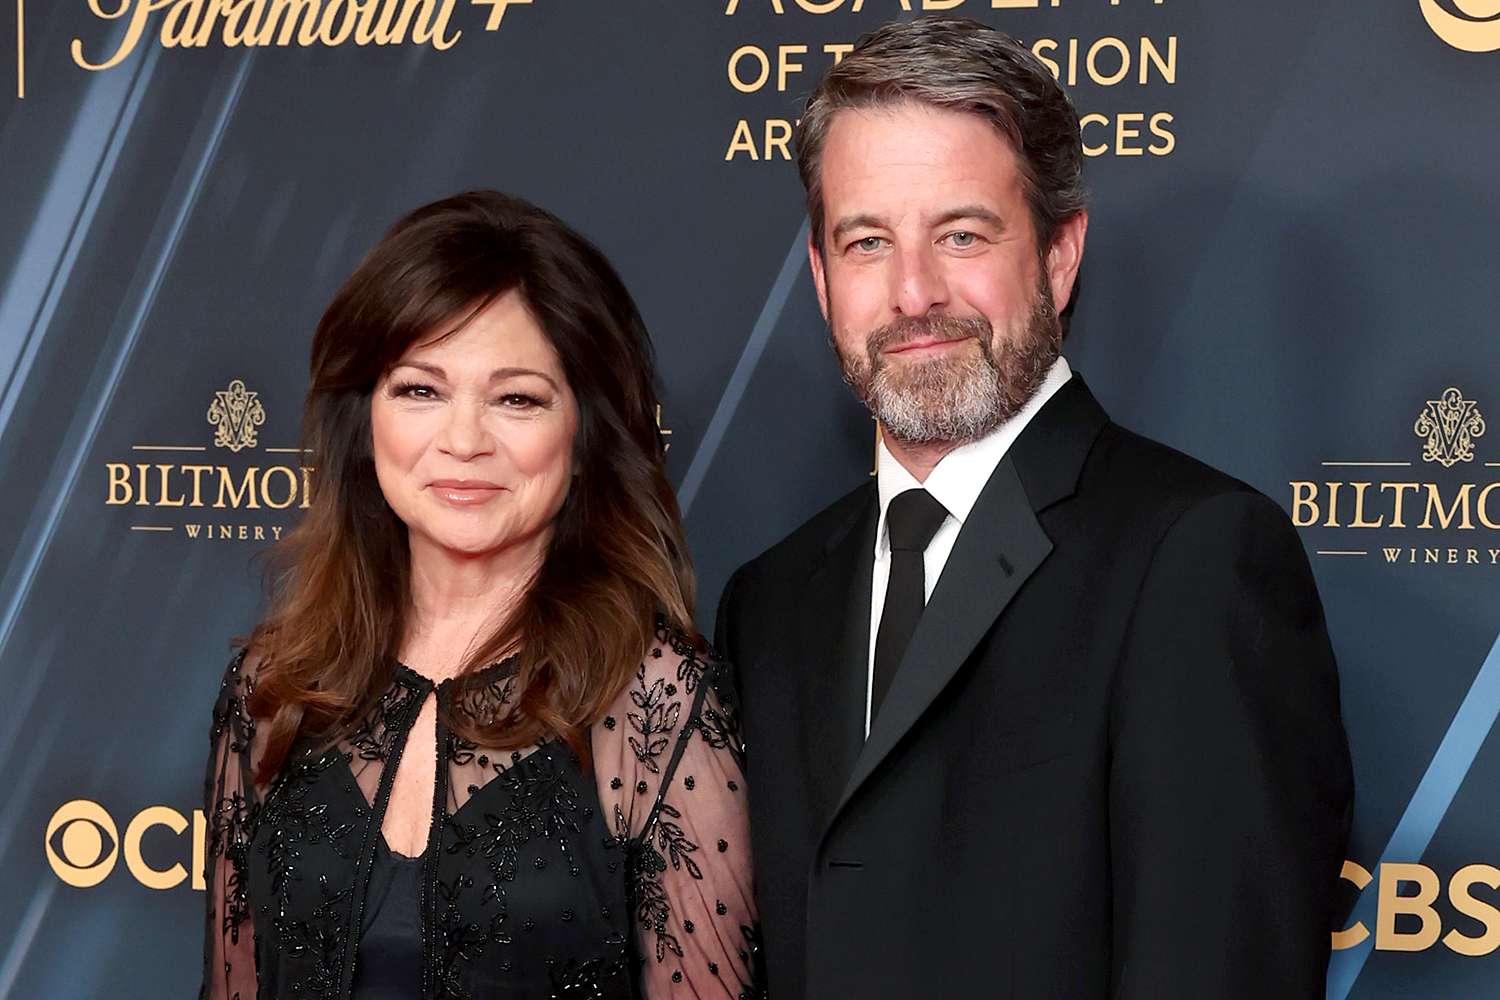 Valerie Bertinelli Says It’s 'Been Challenging’ to Keep Up the ‘Three-Week Rule’ with Her Boyfriend (Exclusive)